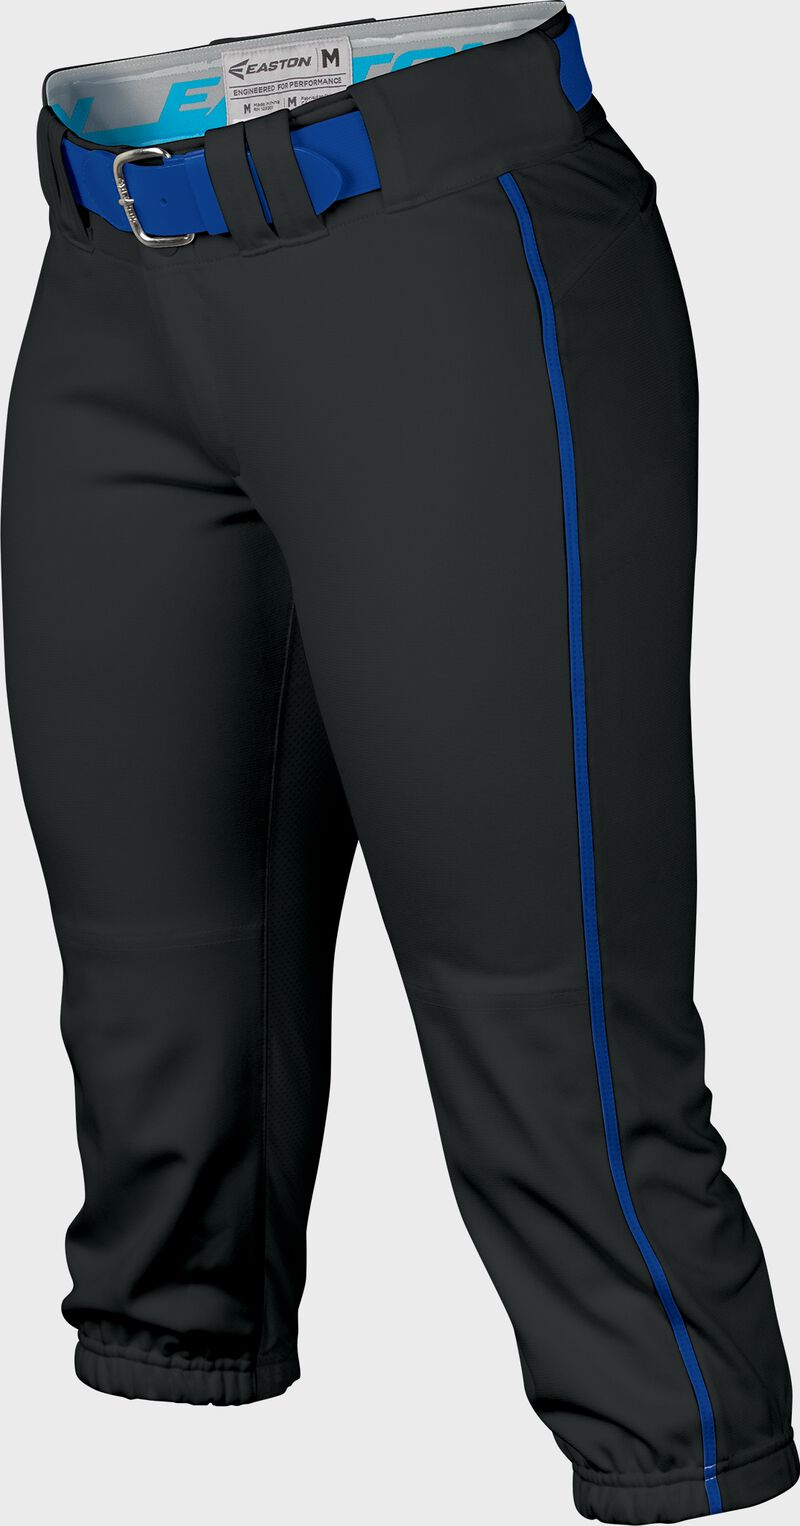 Easton Prowess Softball Pant Women's Piped BLACK/ROYAL  XL